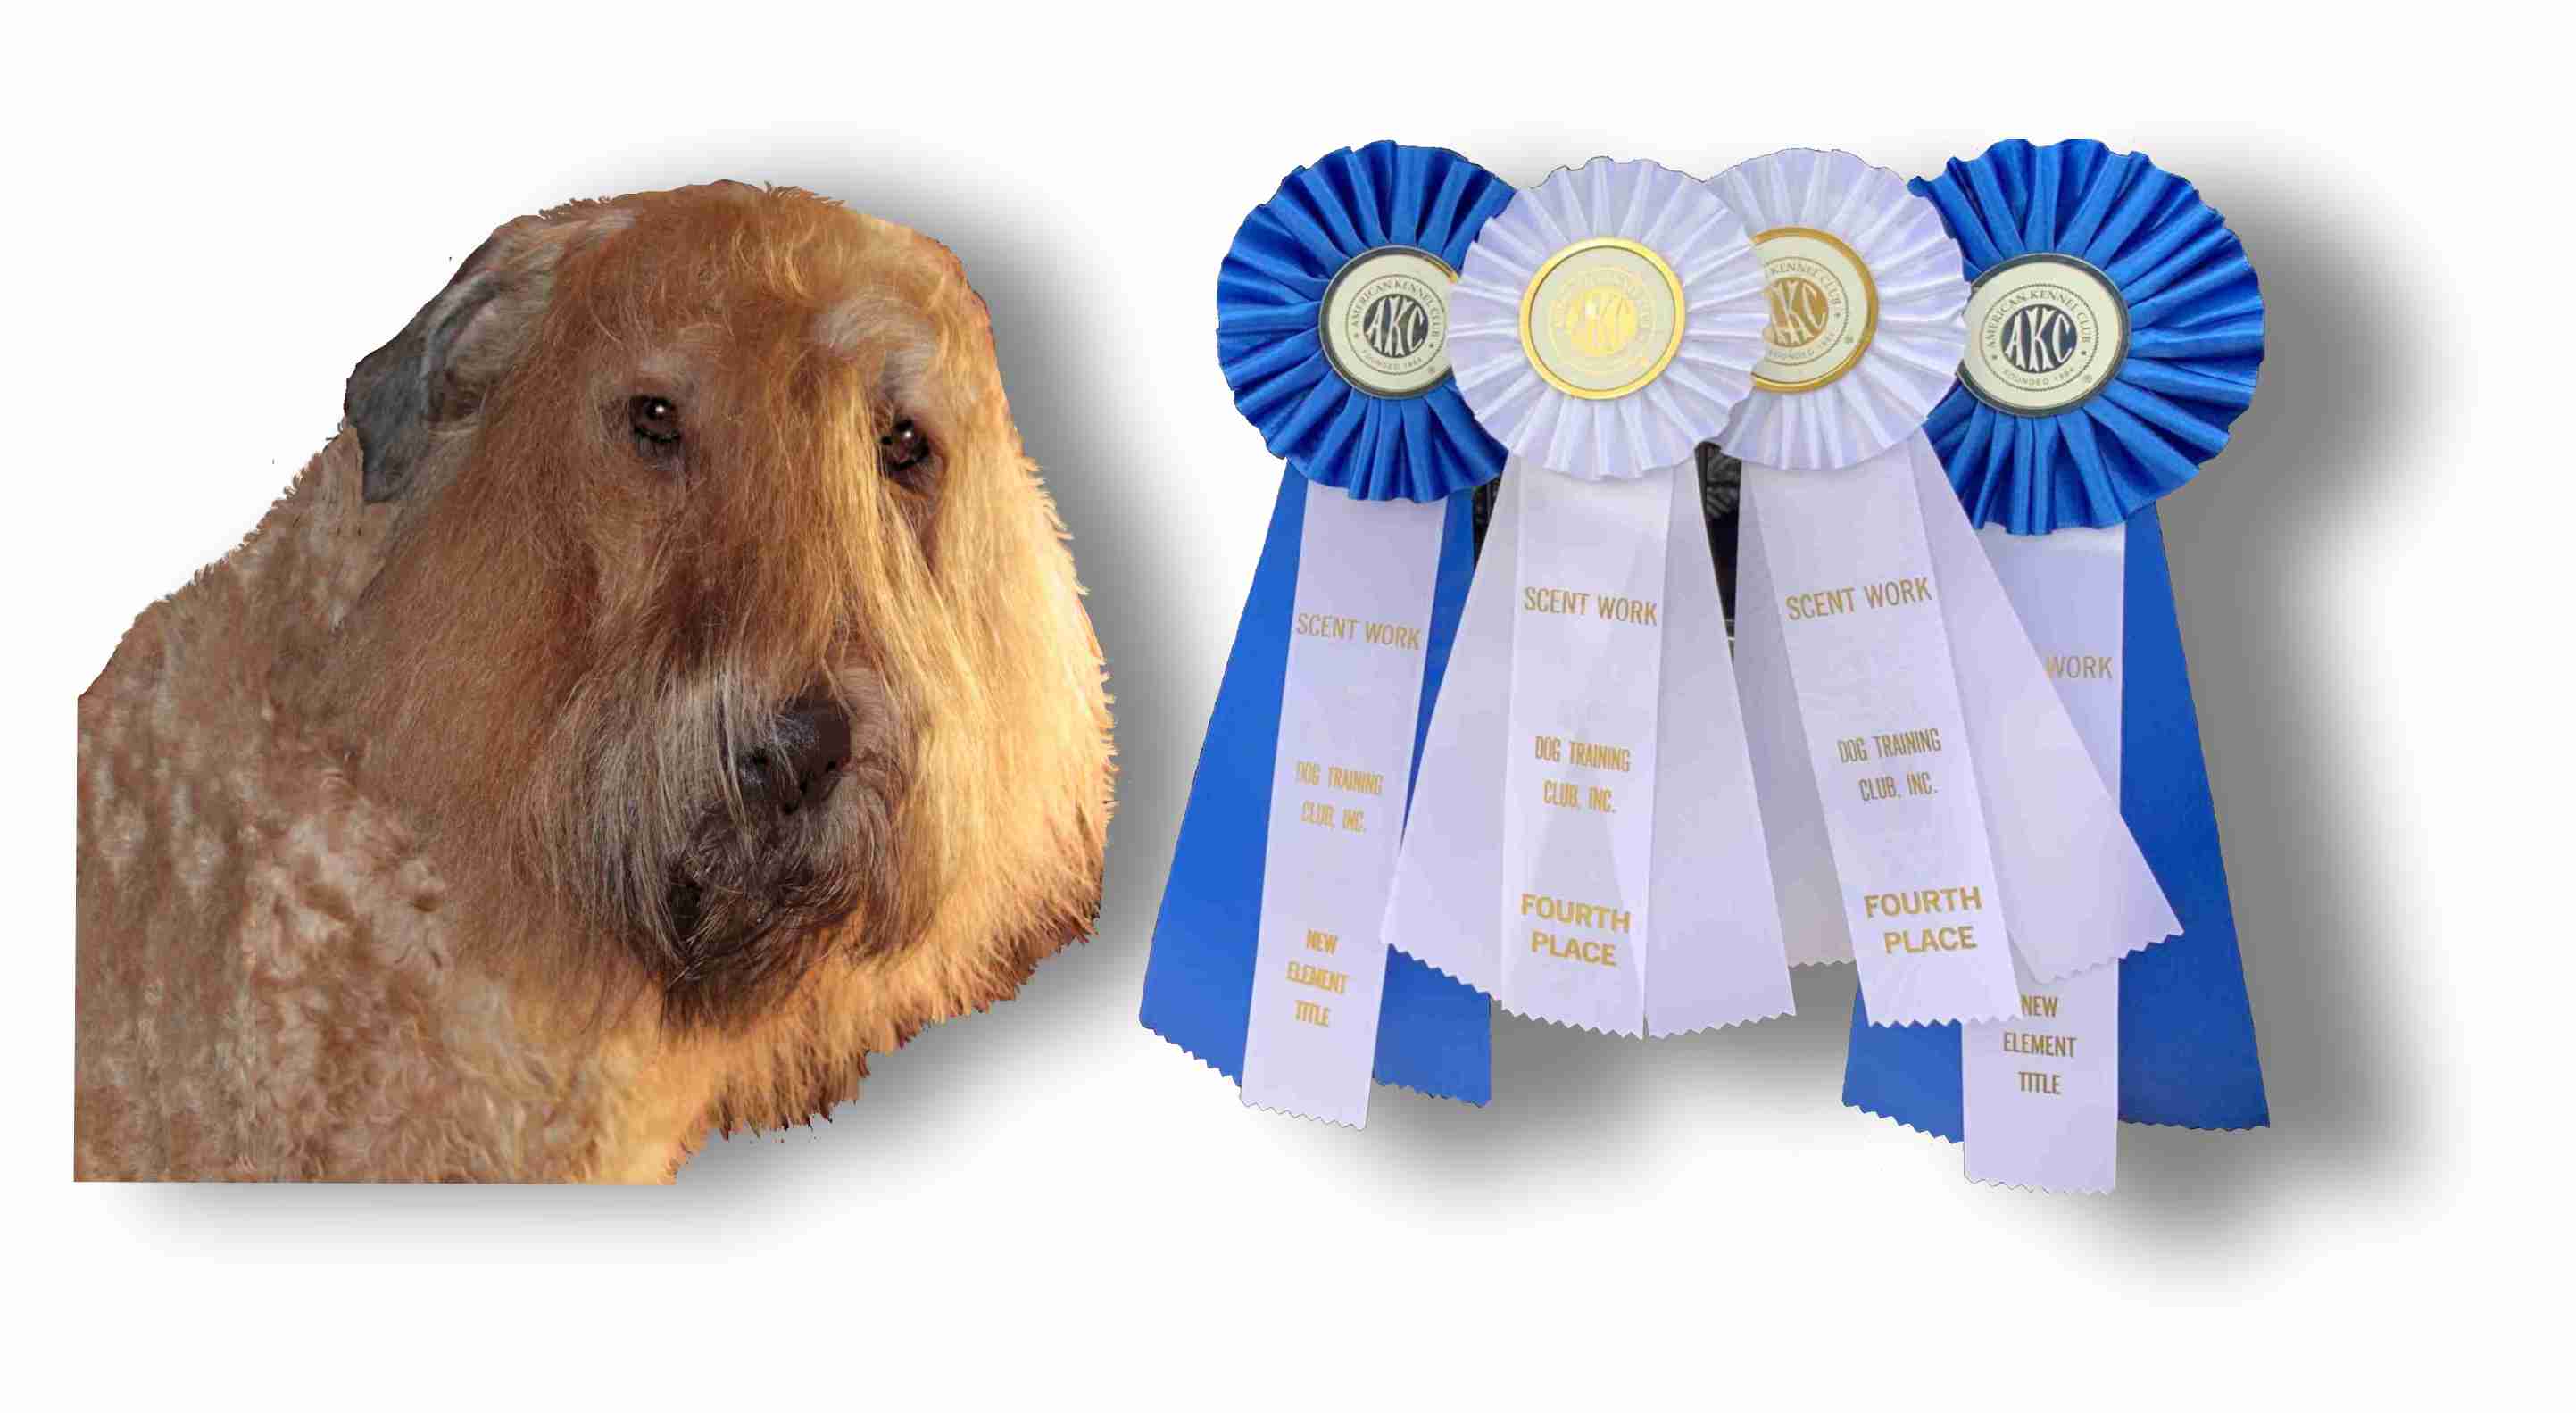 Scent work and The Bouvier des Flandres